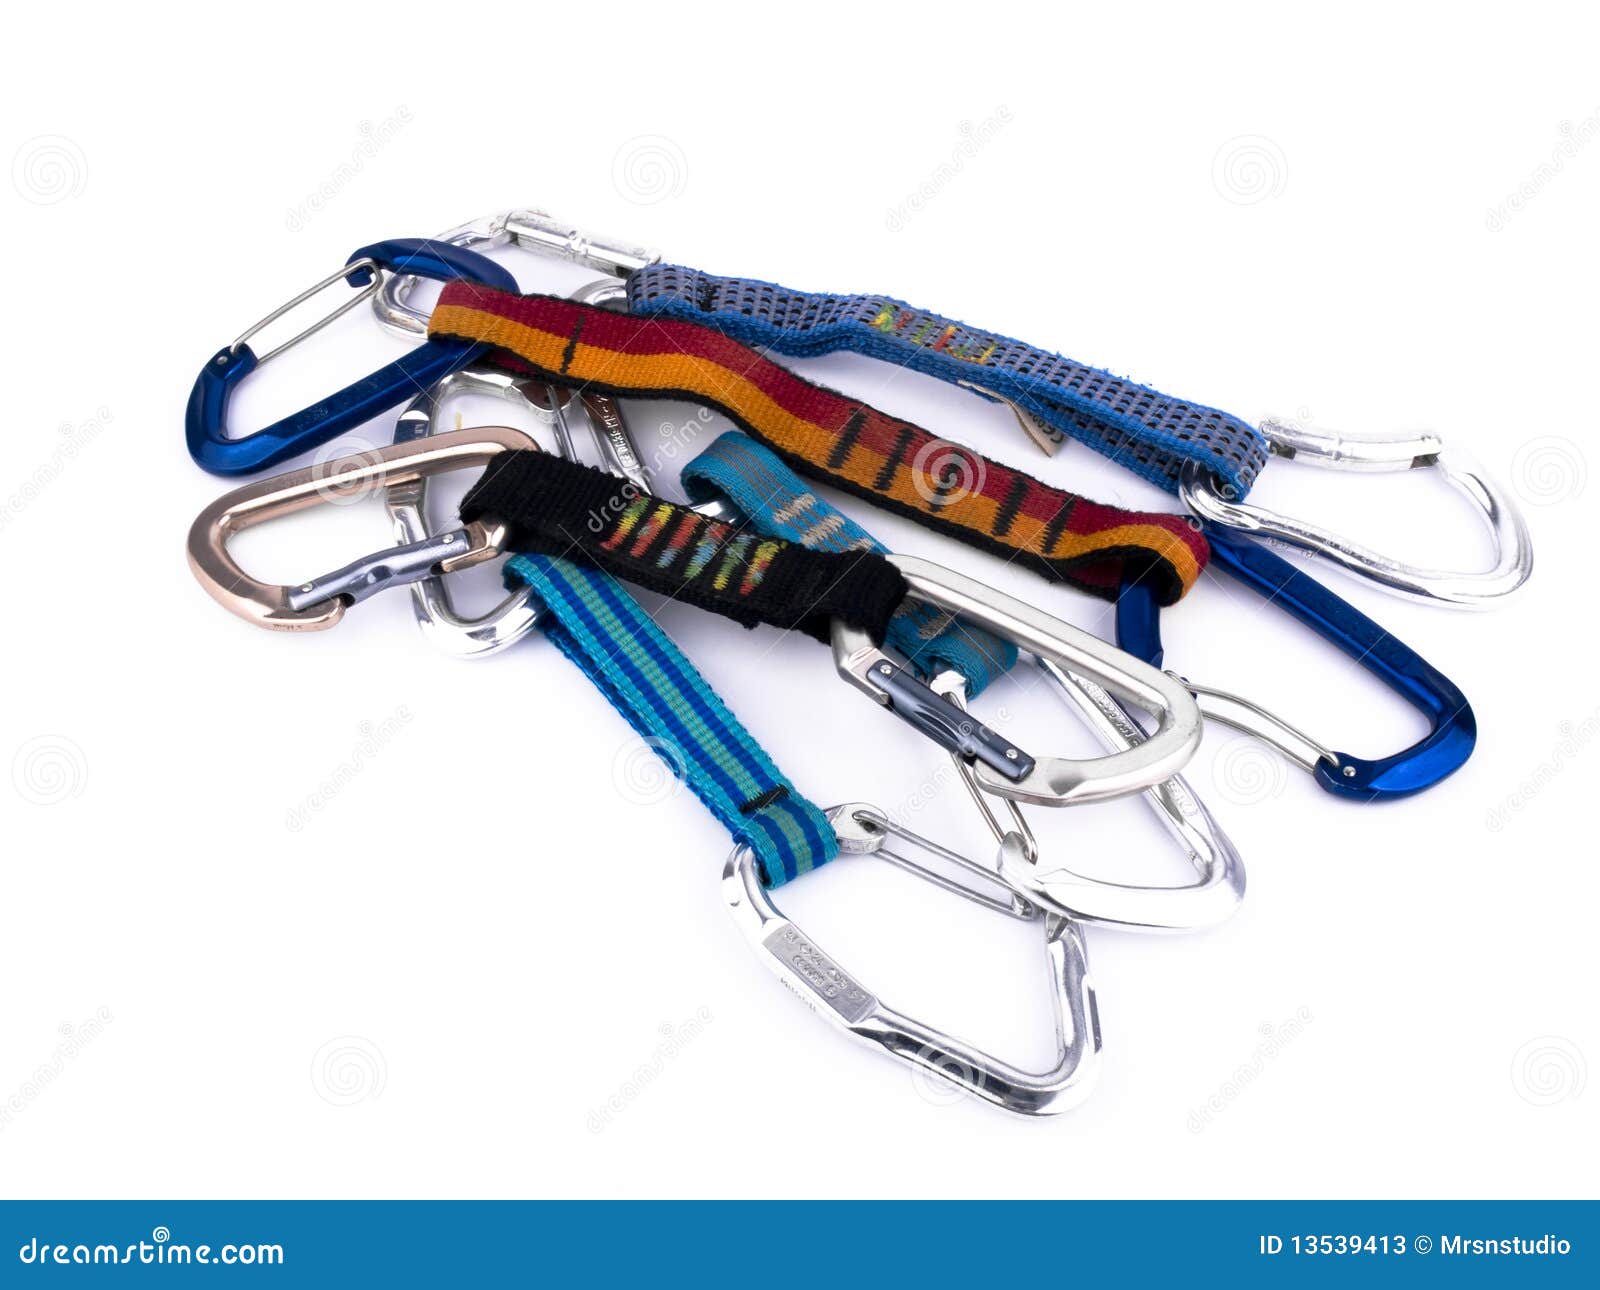 Climbing device stock image. Image of security, mountaineering - 13539413